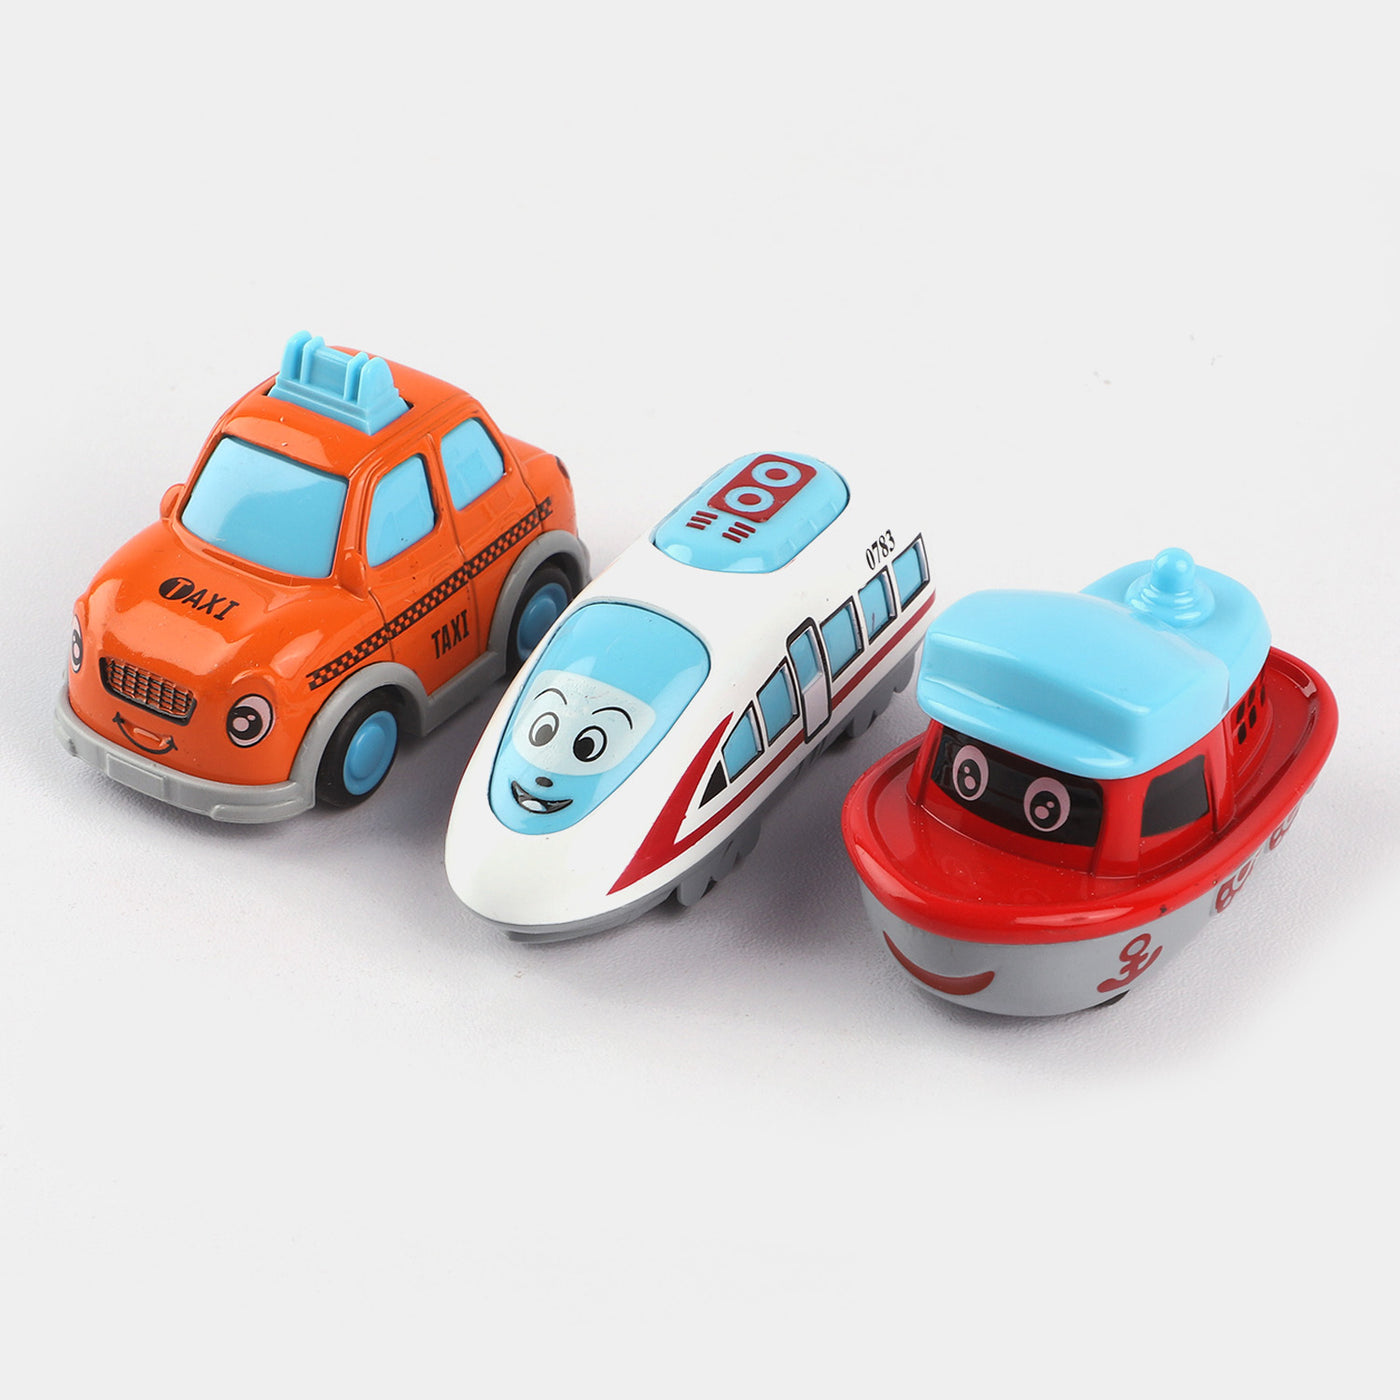 Die Cast Smart Vehicle Toy Play Set For Kids